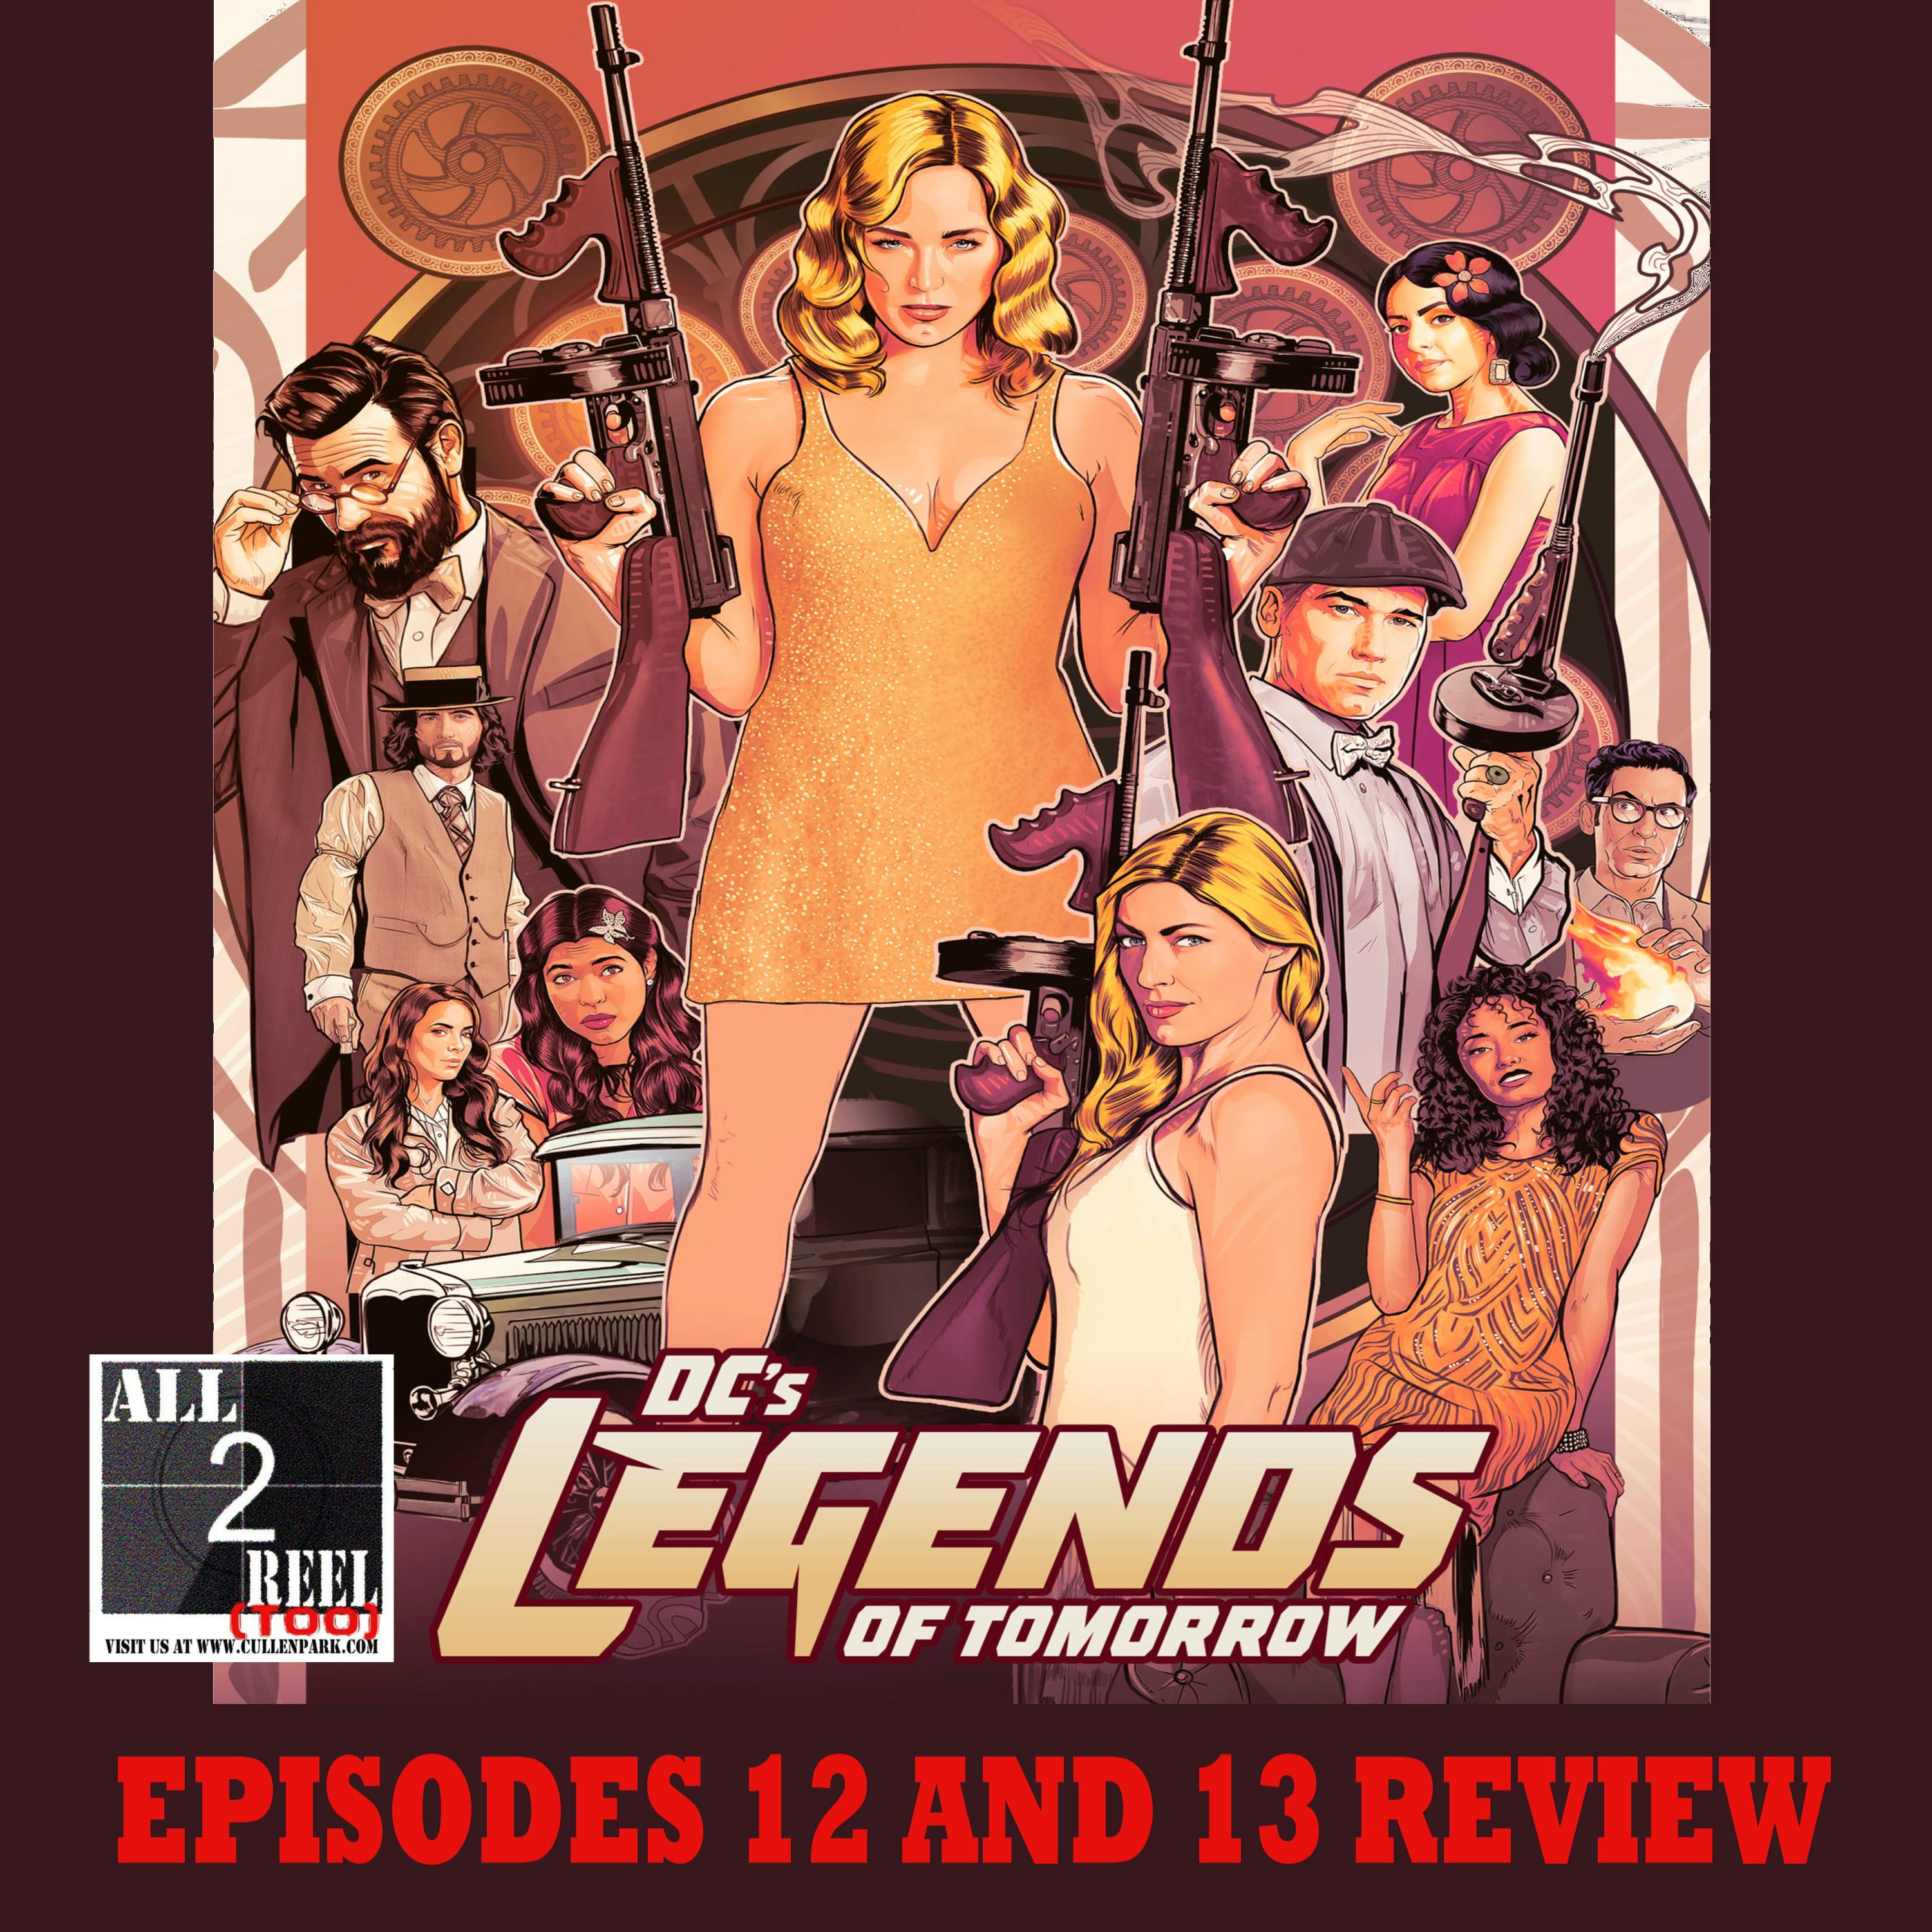 DC’s Legends of Tomorrow SEASON 7 EPISODES 12 AND 13 REVIEW